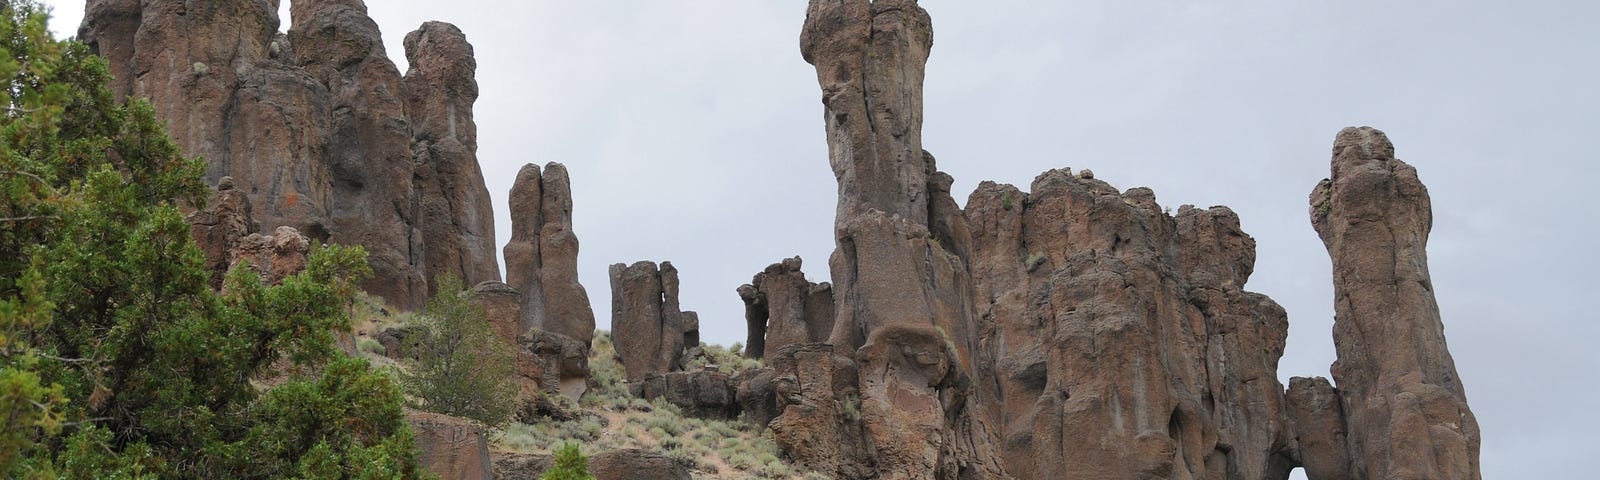 “Fairy chimneys” stand along the cliffs of Jarbidge Canyon in northeastern Nevada.